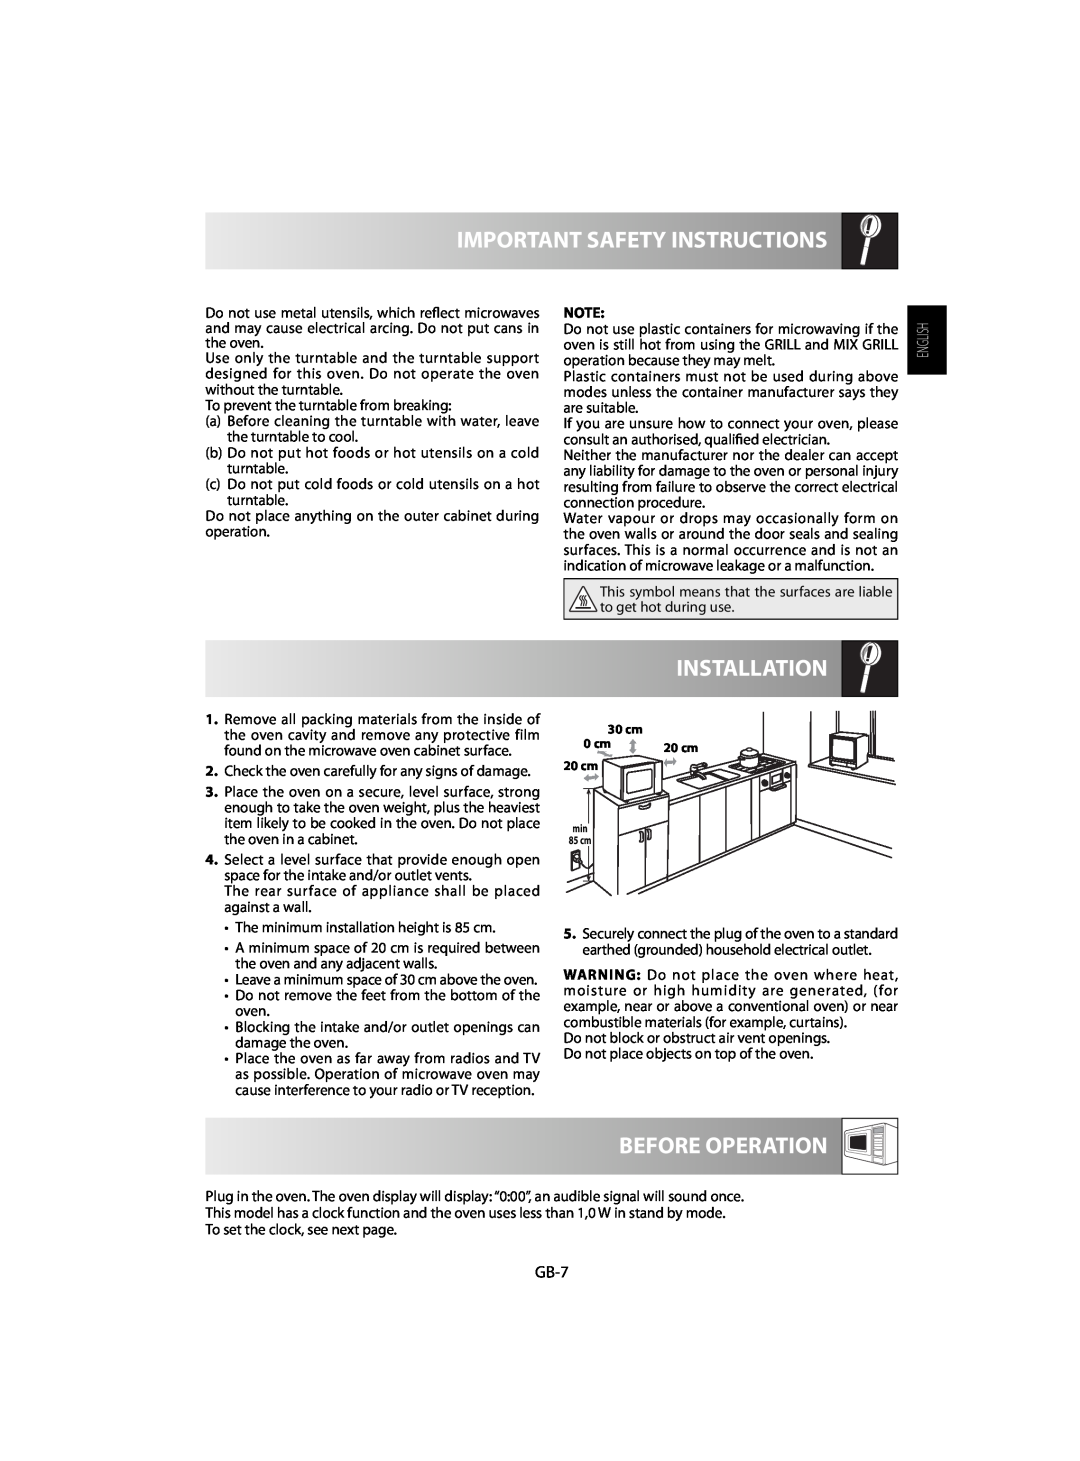 Sharp R-63ST operation manual Installation, Before Operation, Important Safety Instructions, GB-7 